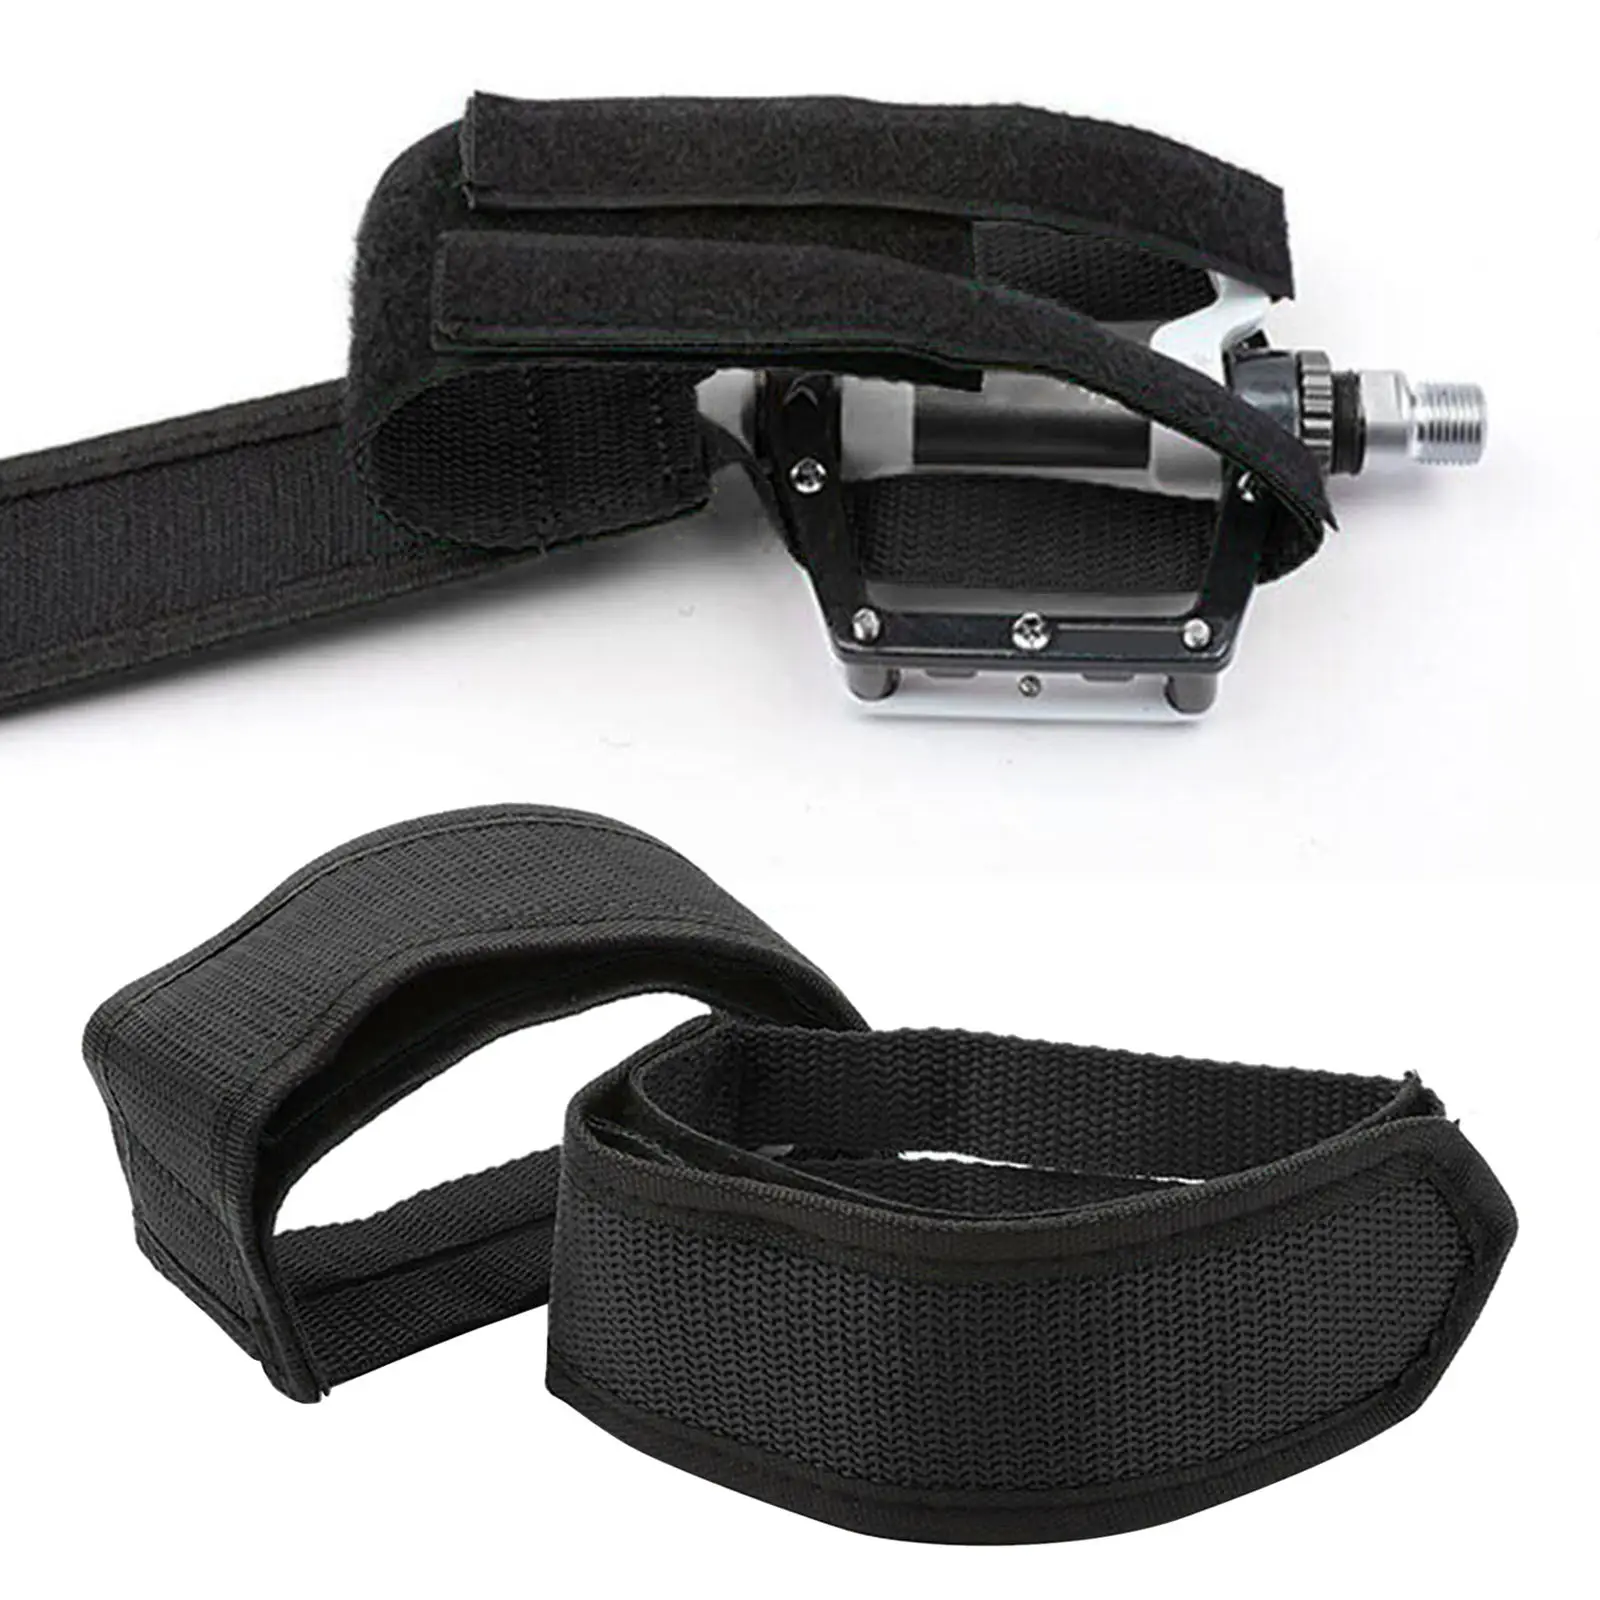 Pedal Strap Fixed Gear Adhesive Pedal Straps for Cycling Outdoor Mountain Bike Adults